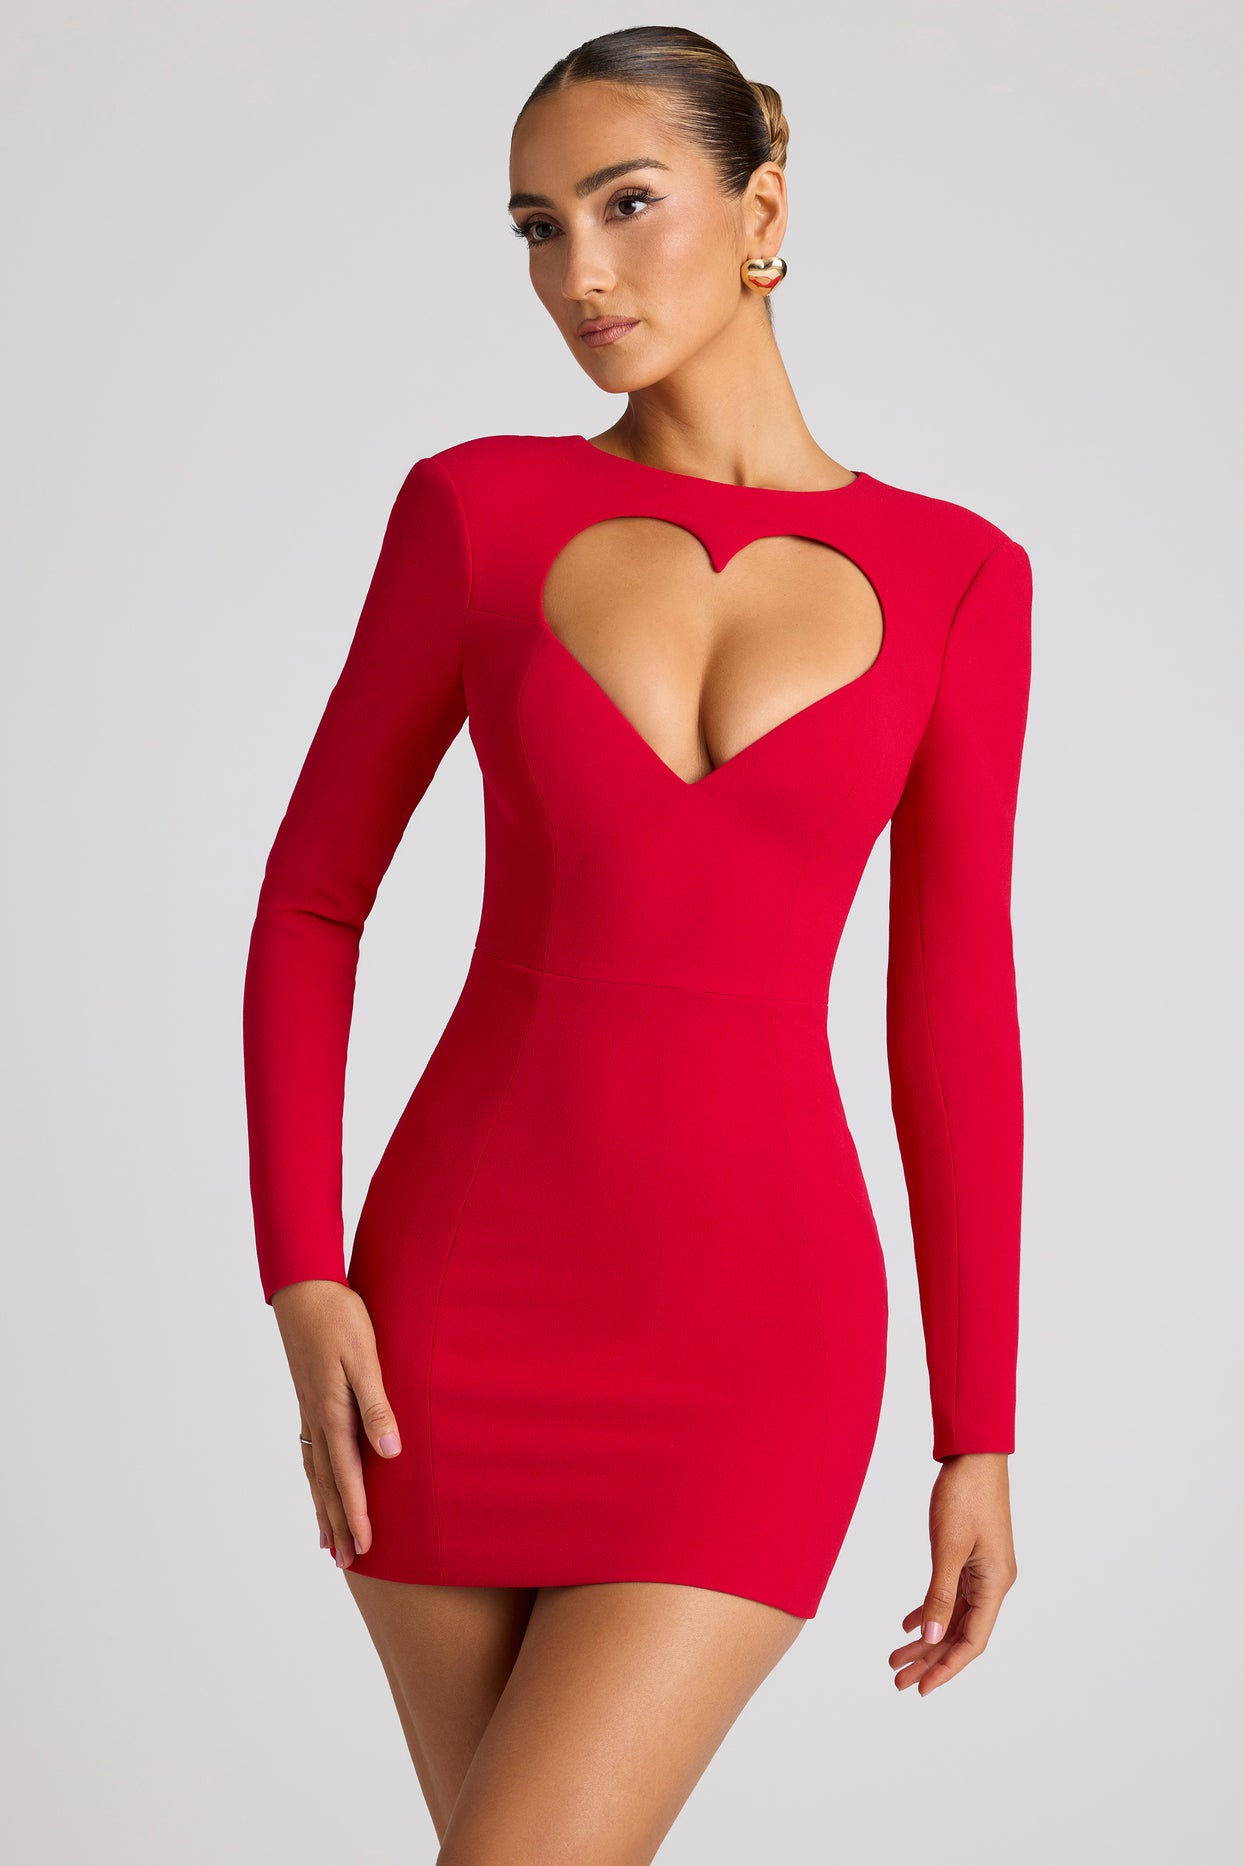 Heart Cut Out Long Sleeve Mini Dress in Fire Red